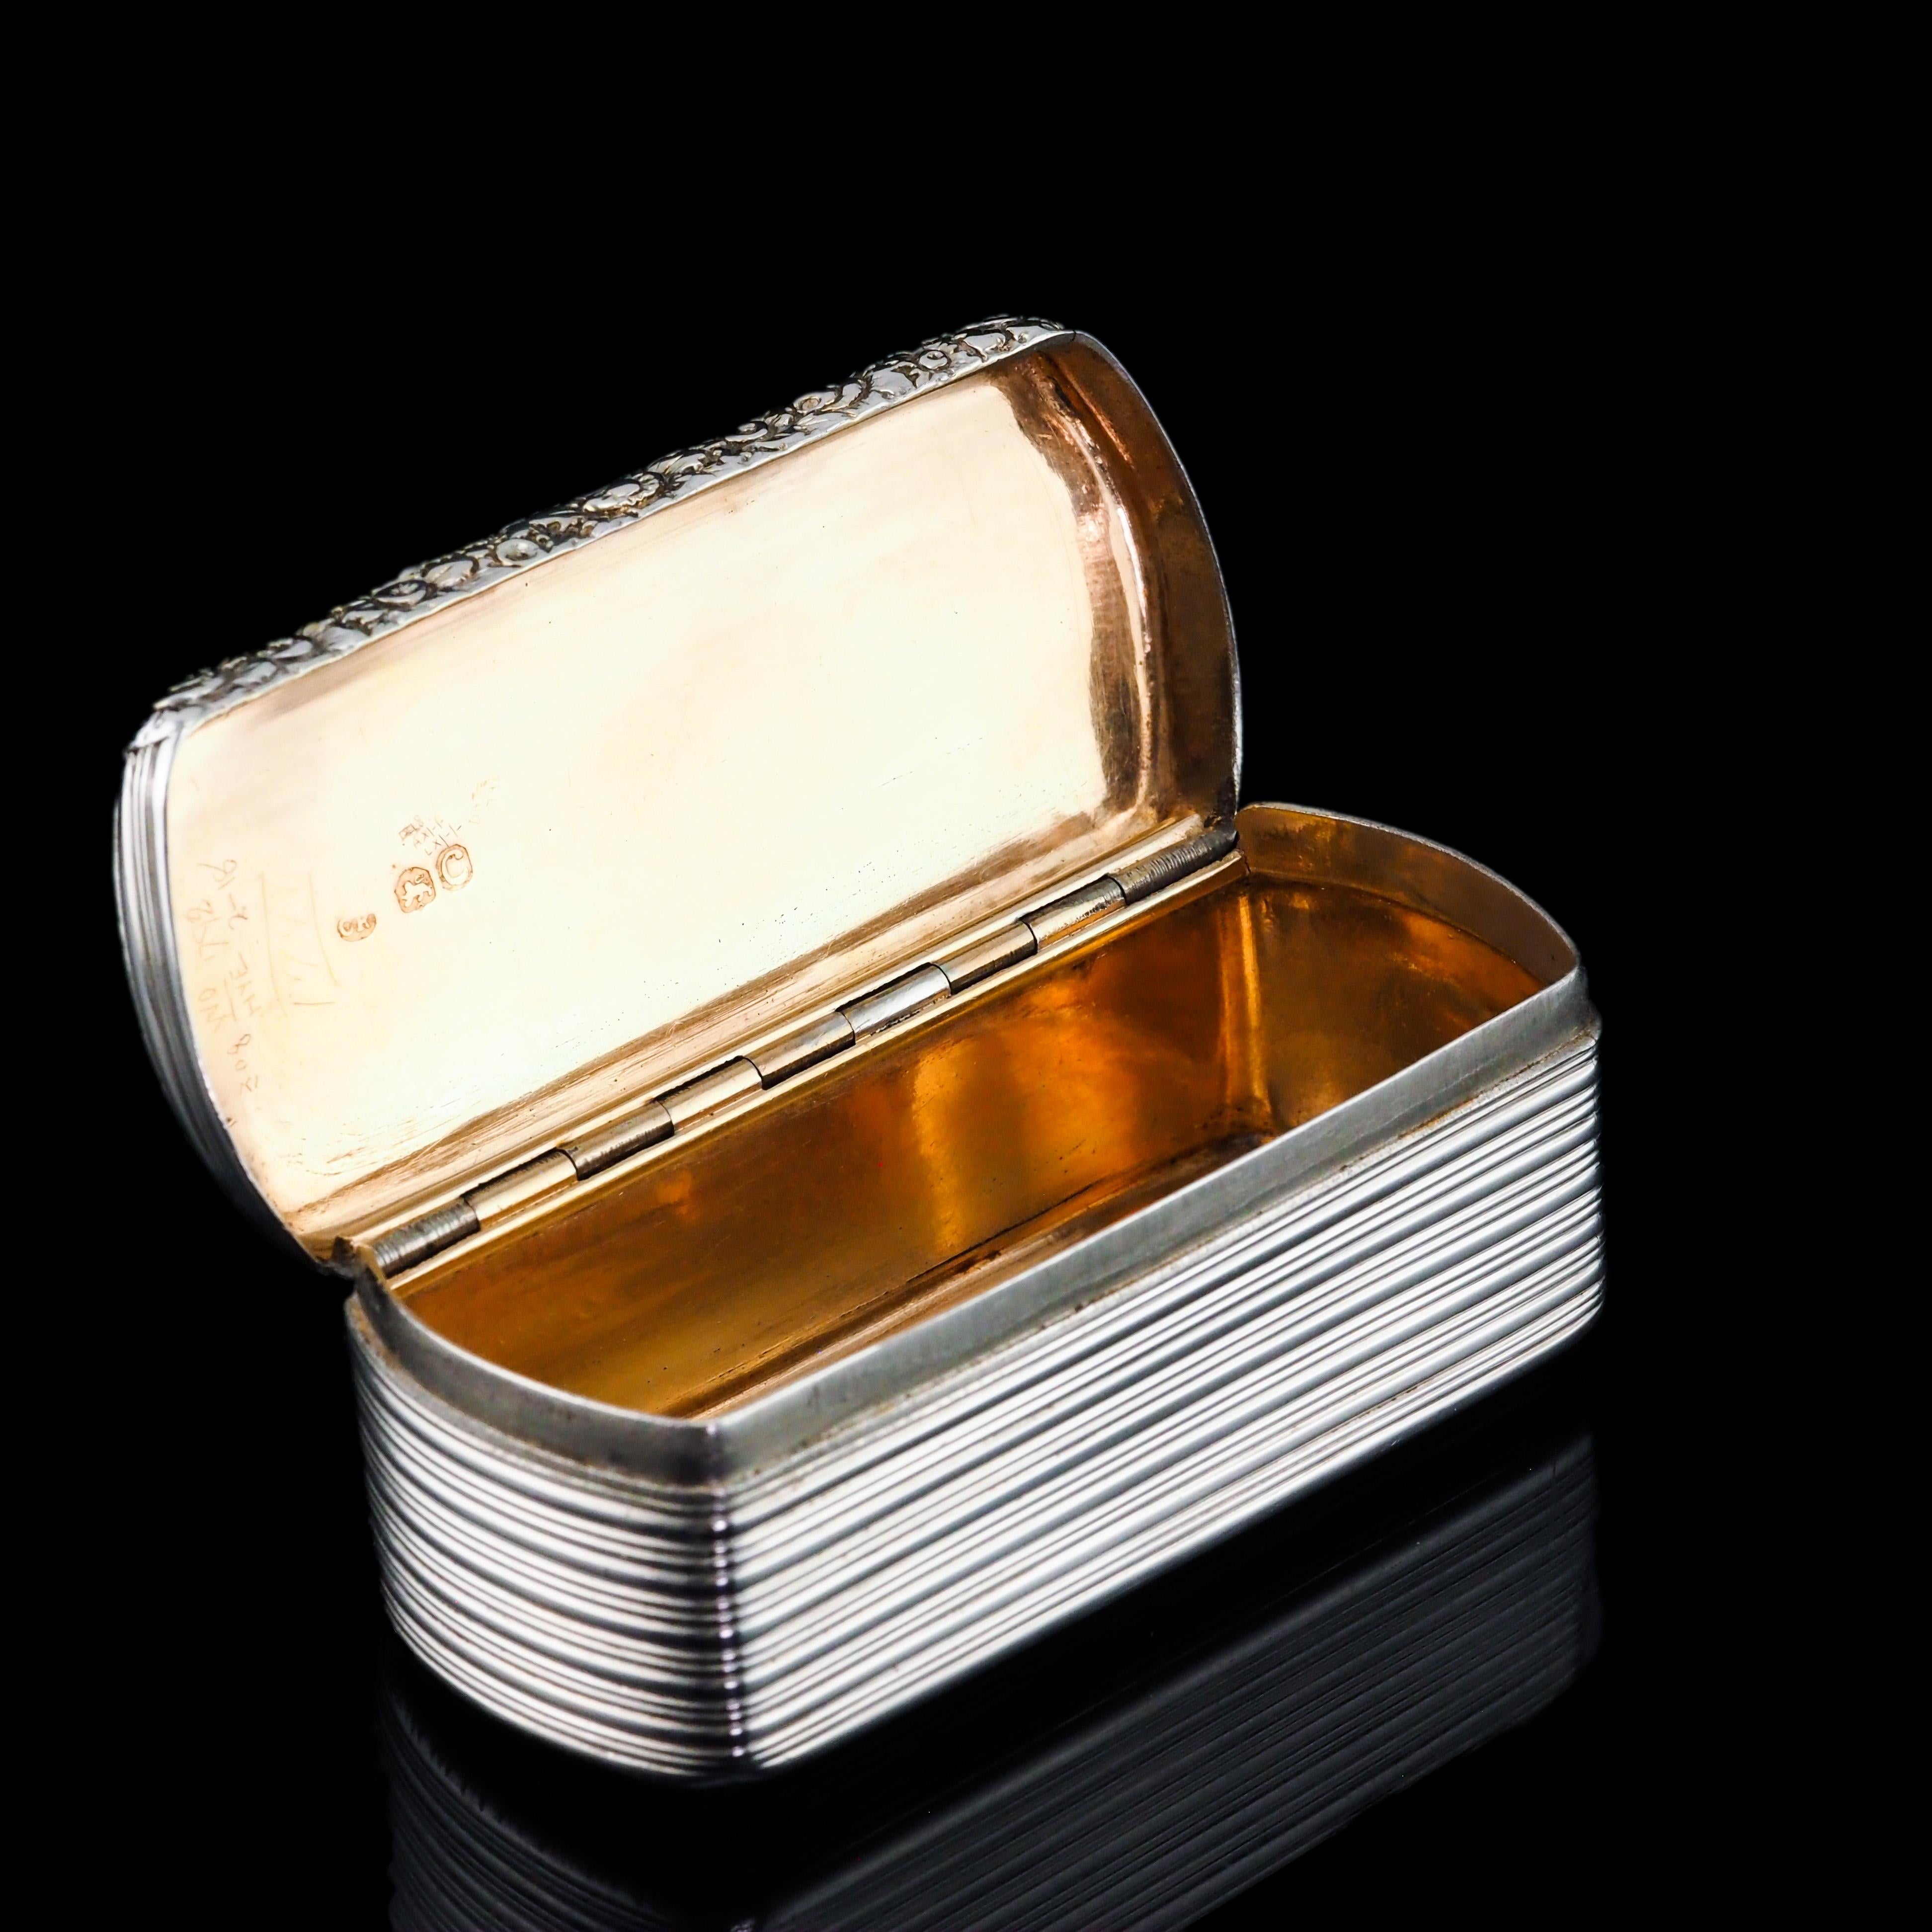 We are delighted to offer this classically elegant Georgian solid silver snuff box made by Charles Rawlings, London 1818.
 
The box features an understated and timeless Georgian design with reeded band decorations on all sides of the oblong box. 
